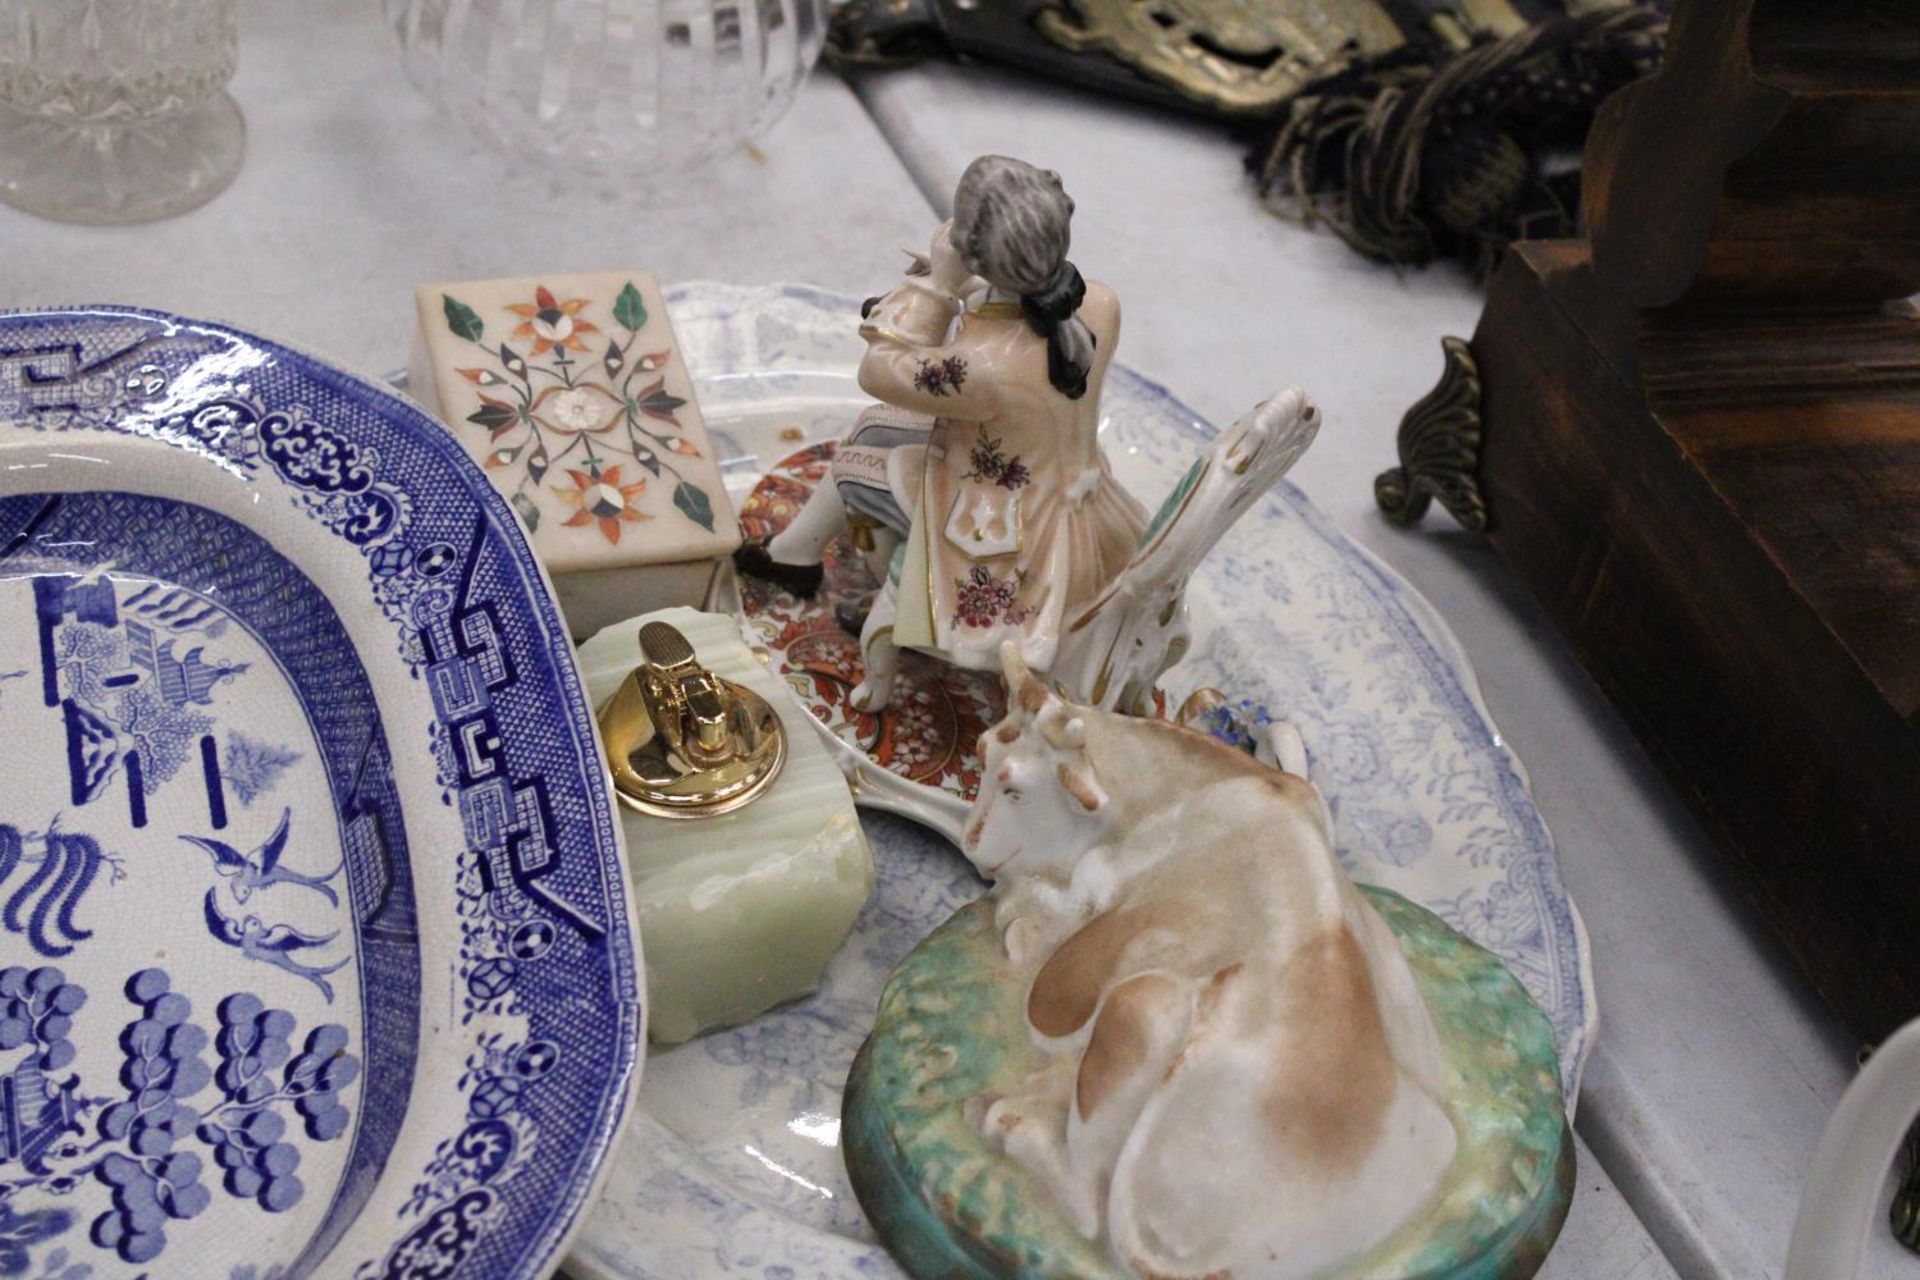 TWO VINTAGE BLUE AND WHITE PLATTERS, CABINET PLATES, AN ONYX TABLE LIGHTER, TRINKET BOX AND FIGURINE - Image 5 of 6